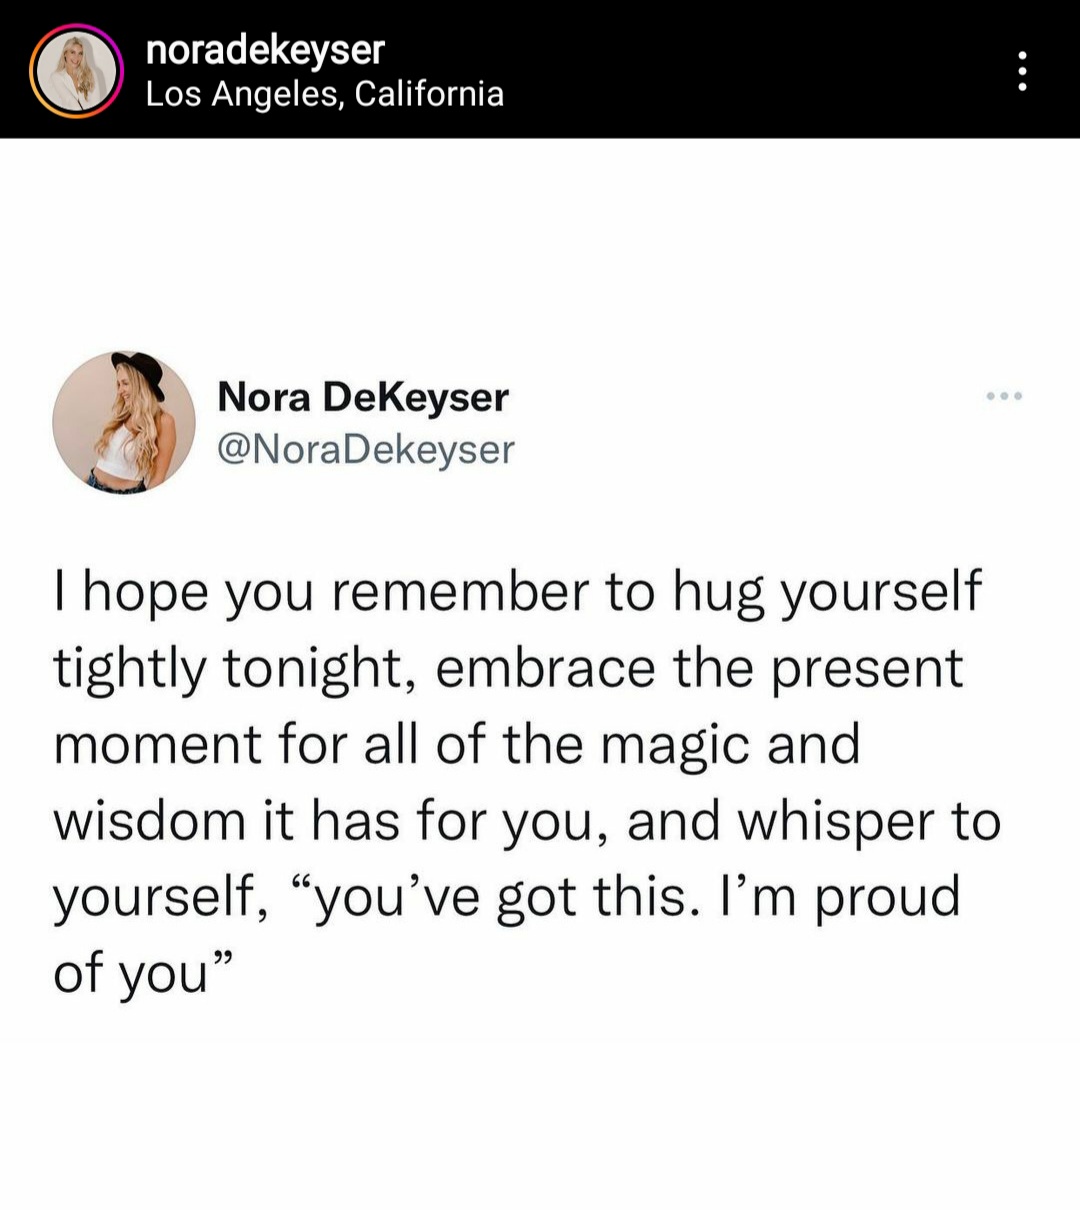 I hope you remember to hug yourself tightly tonight, embrace the present moment for all the magic and wisdom it has for you, and whisper to yourself, "you've got this." I'm proud of you". Nora Dekeyser, coaching tip